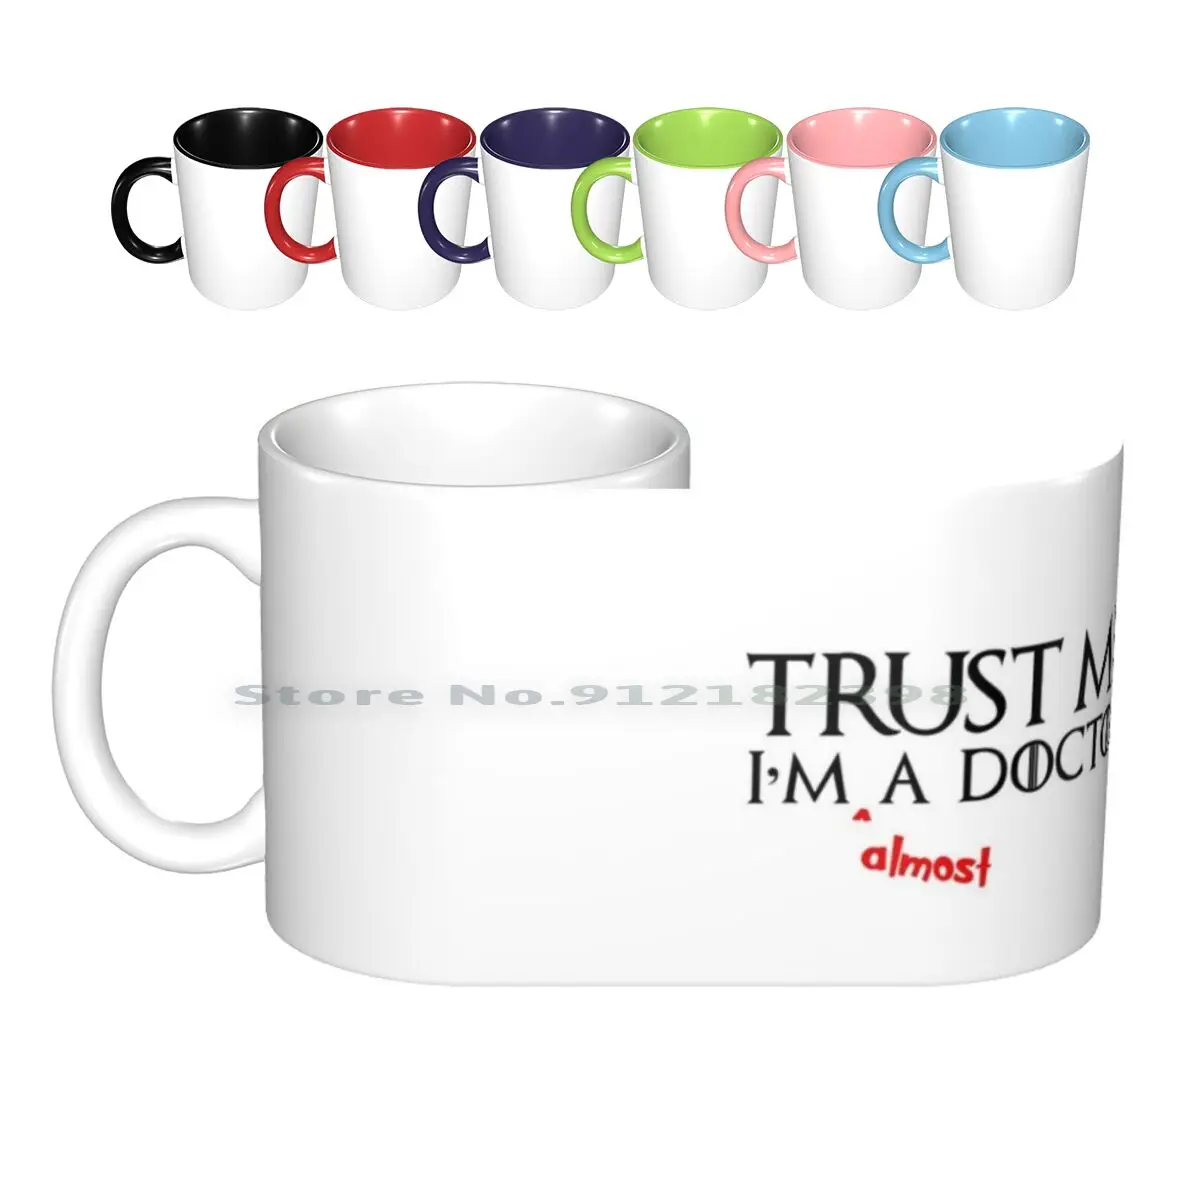 

Student Gifts - Trust Me I'm Almost A Funny Gift Ideas For Med School & Graduation Presents For Students Ceramic Mugs Coffee Cup